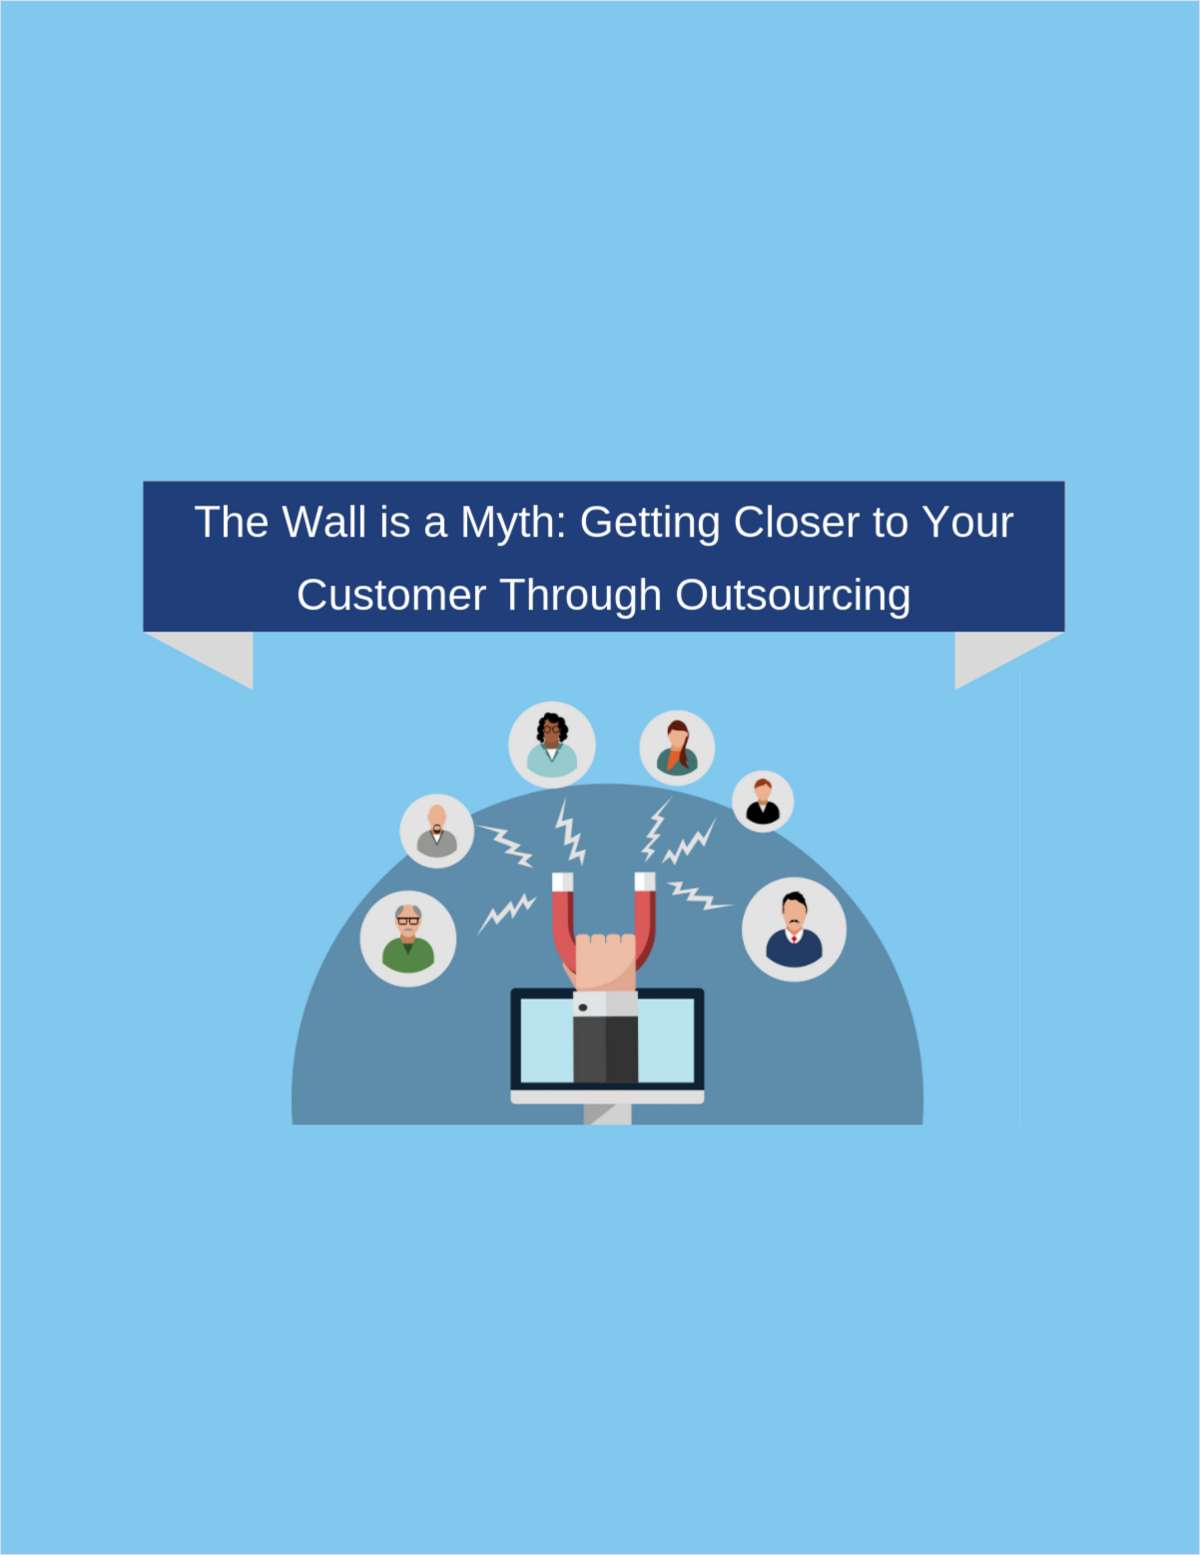 The Wall is a Myth: Getting Closer to Your Customer Through Outsourcing